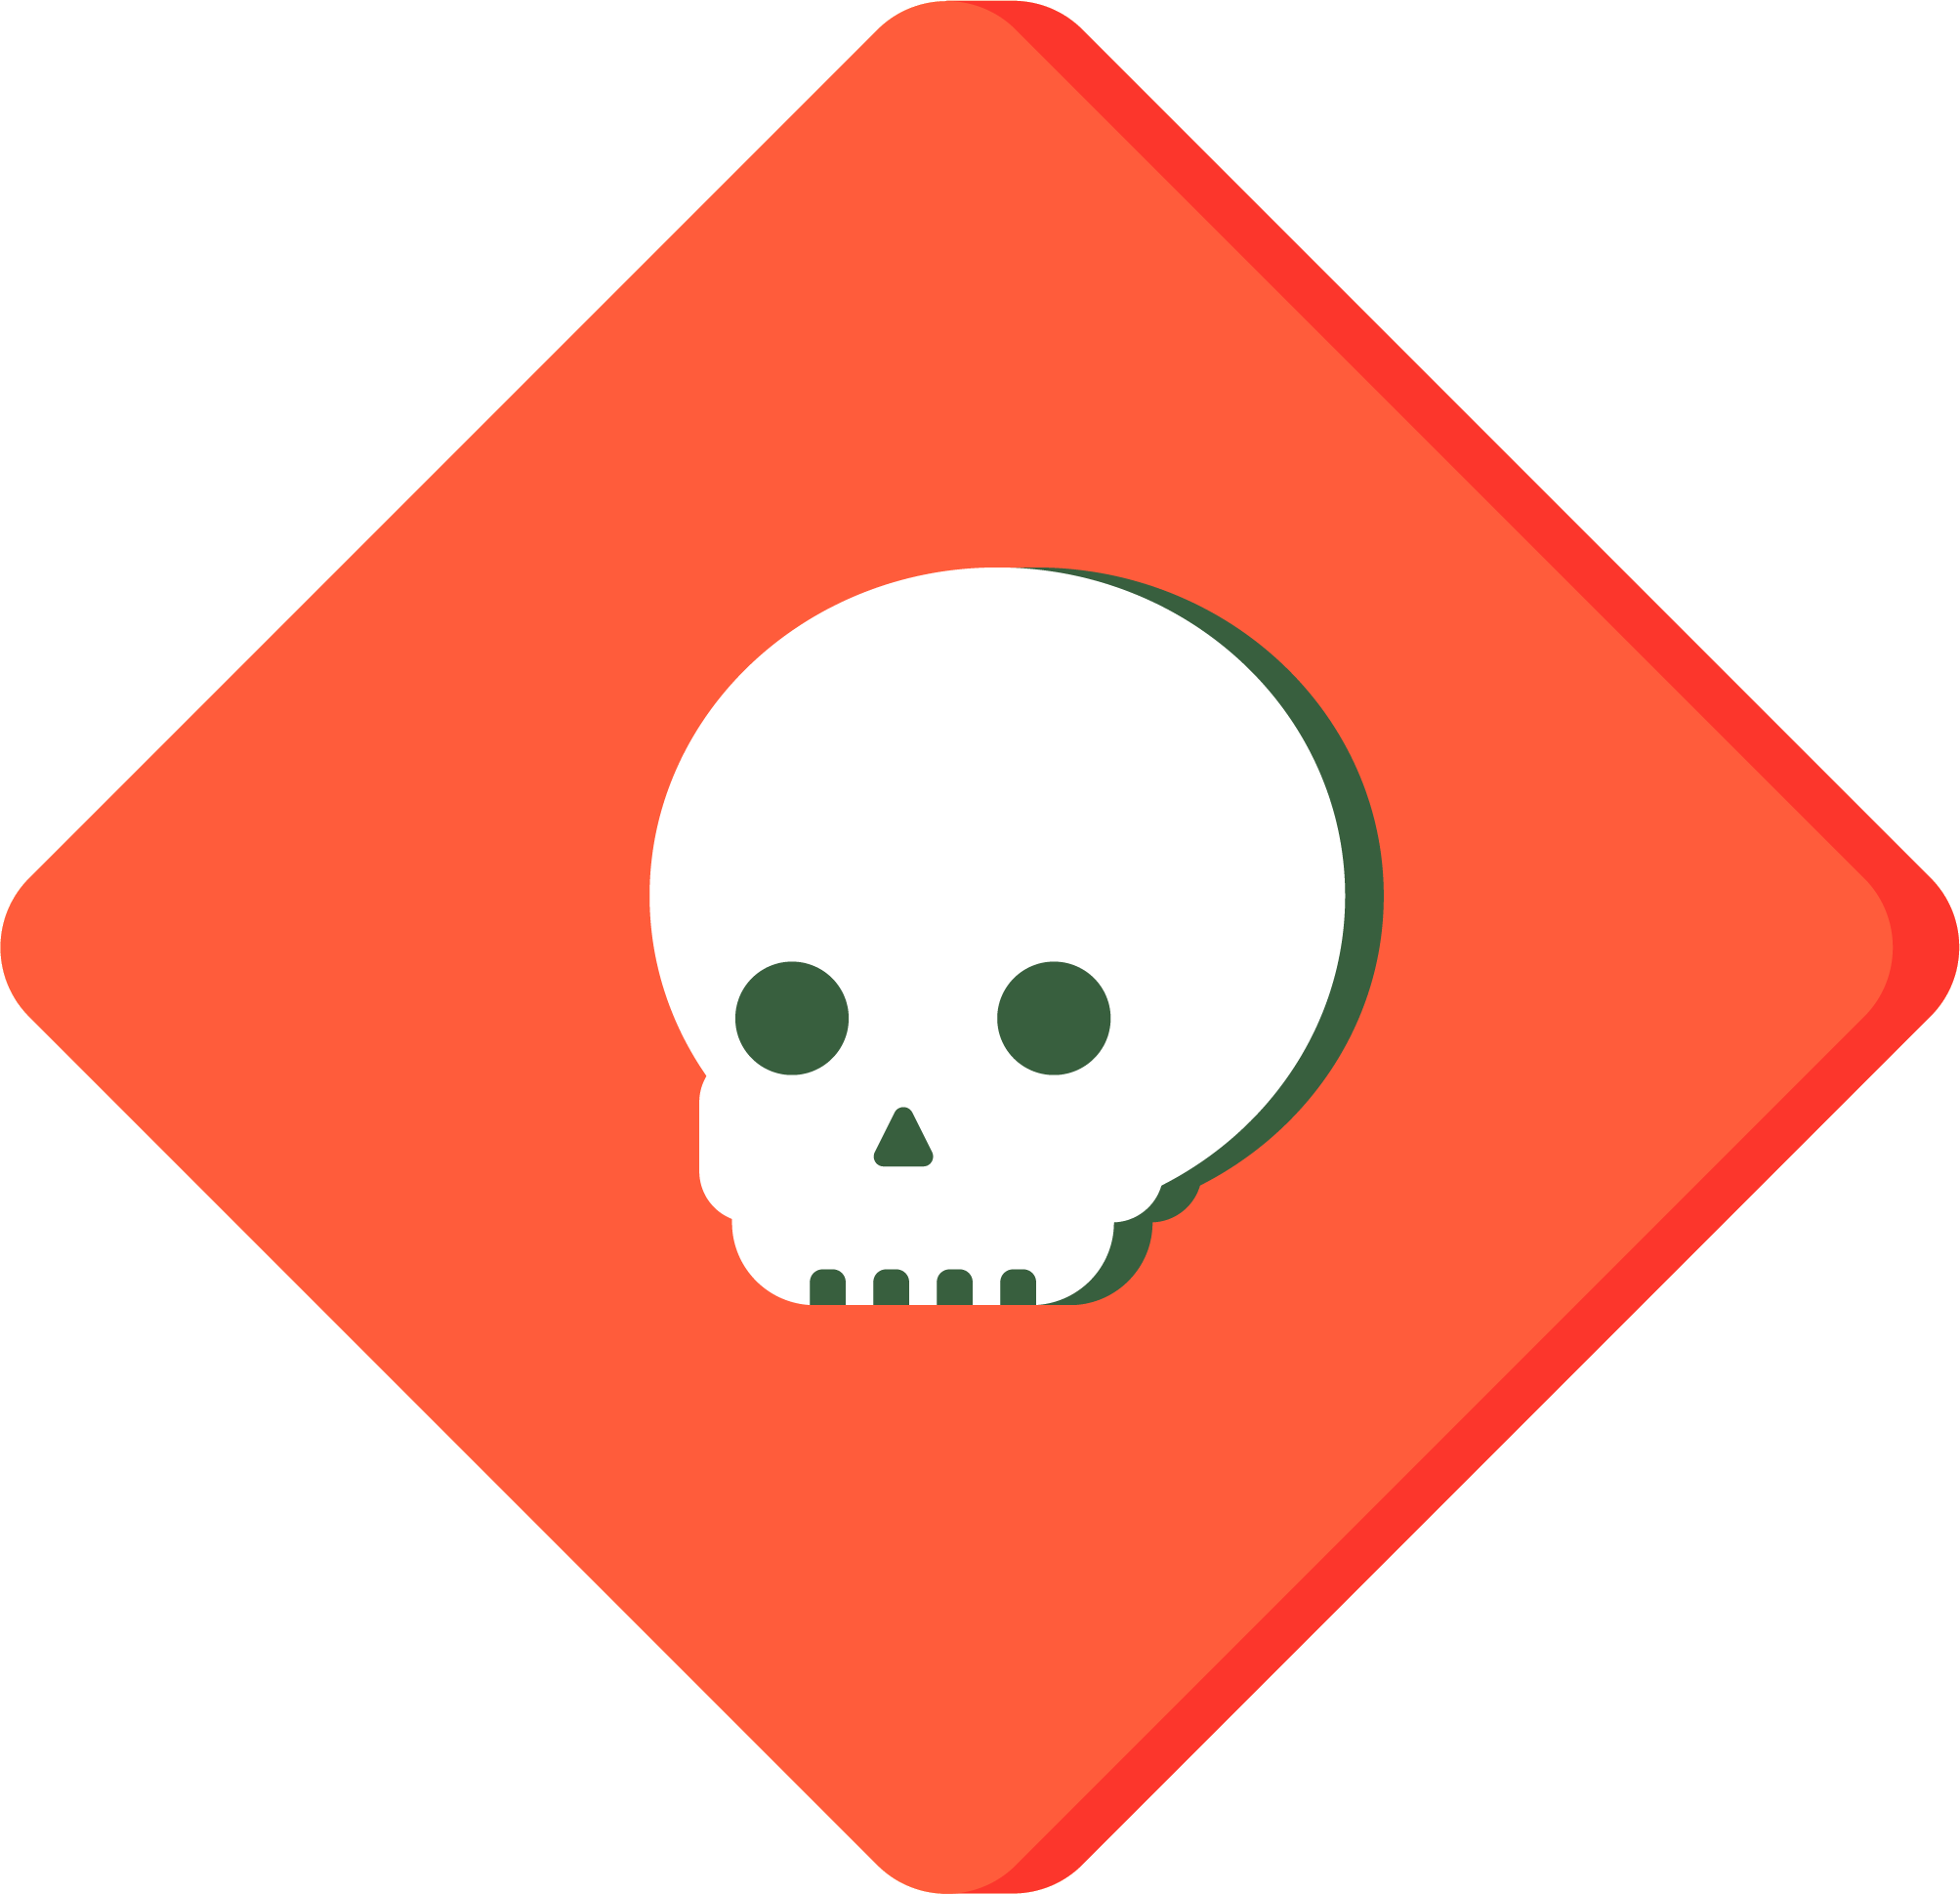 A red diamond shaped outline (like a warning sign) with a skull in the middle.